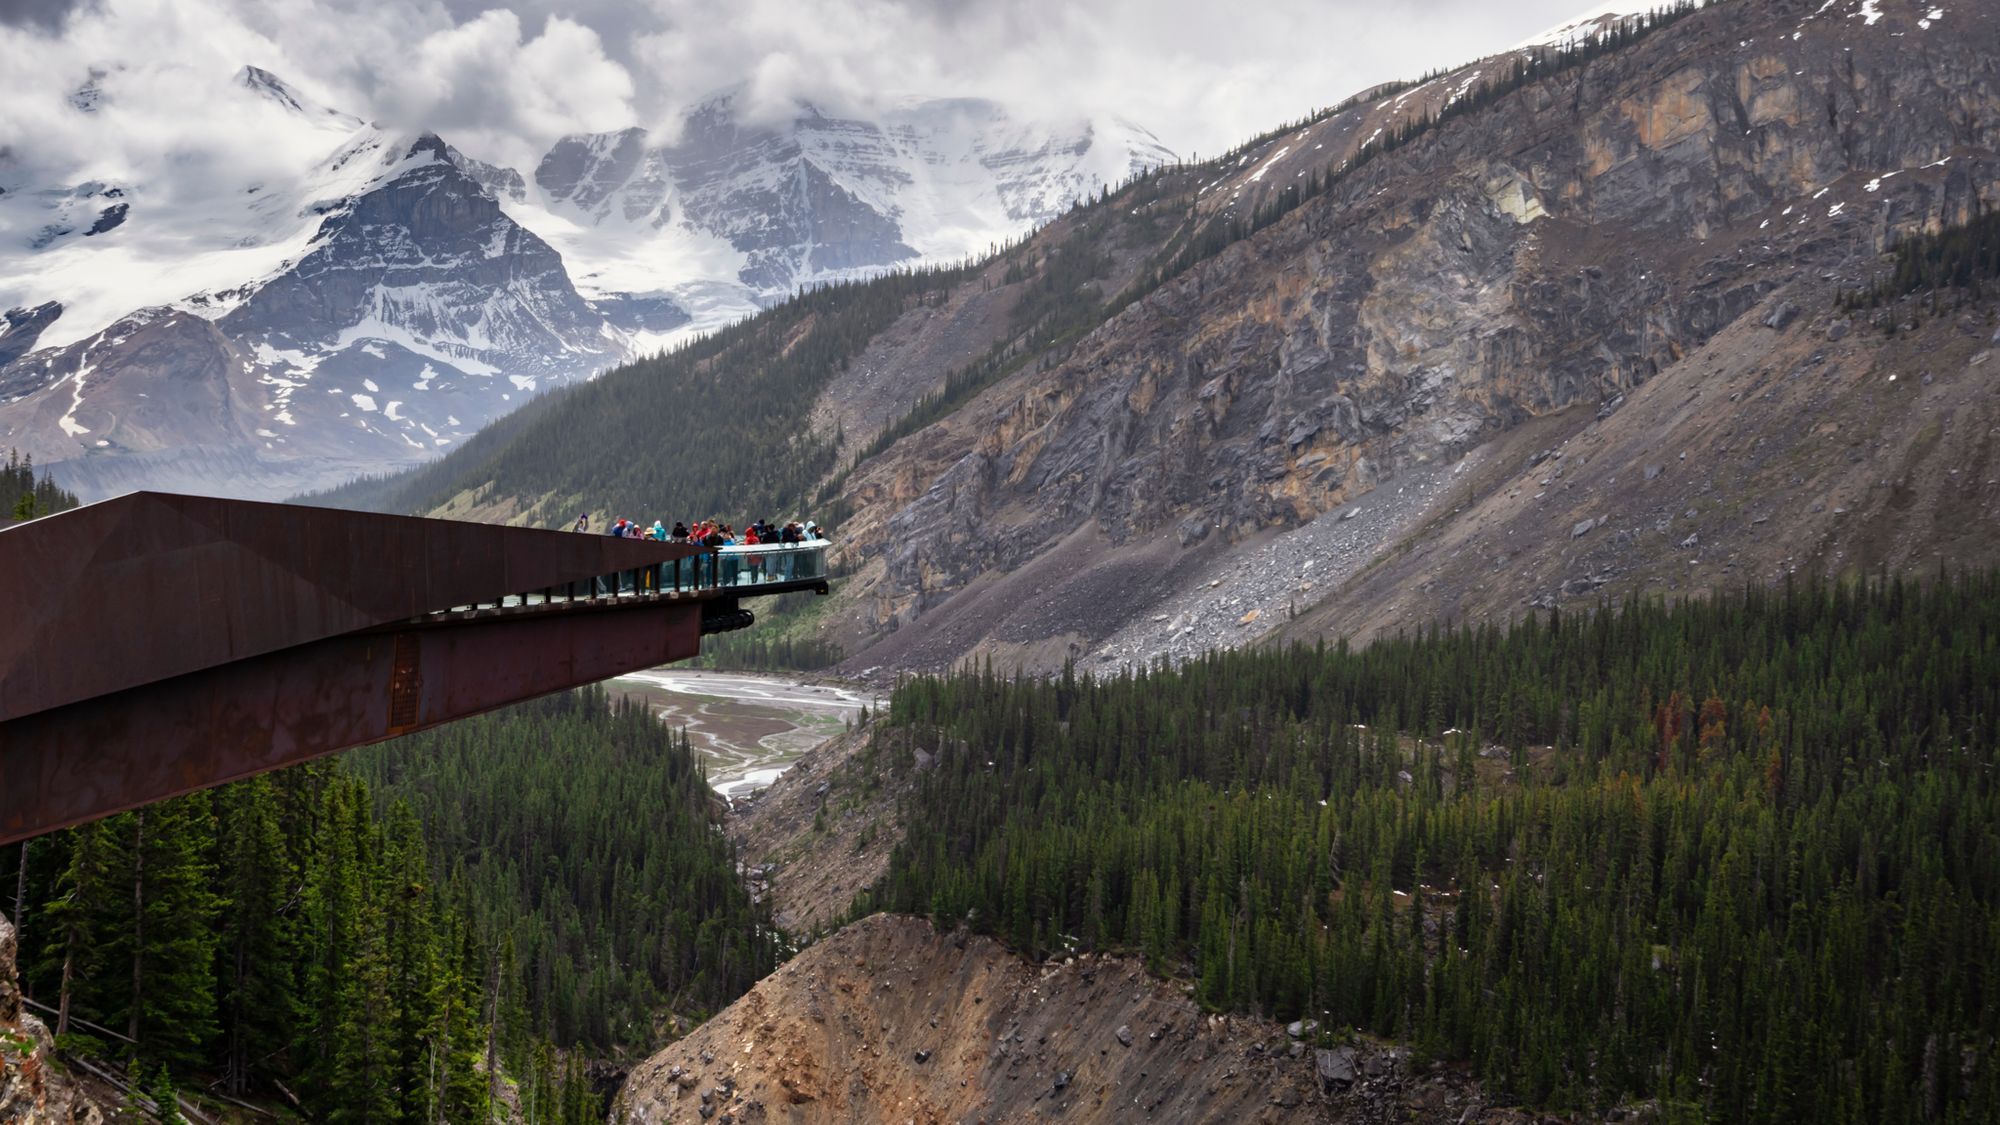 Visitors on the Columbia Icefield Skywalk.